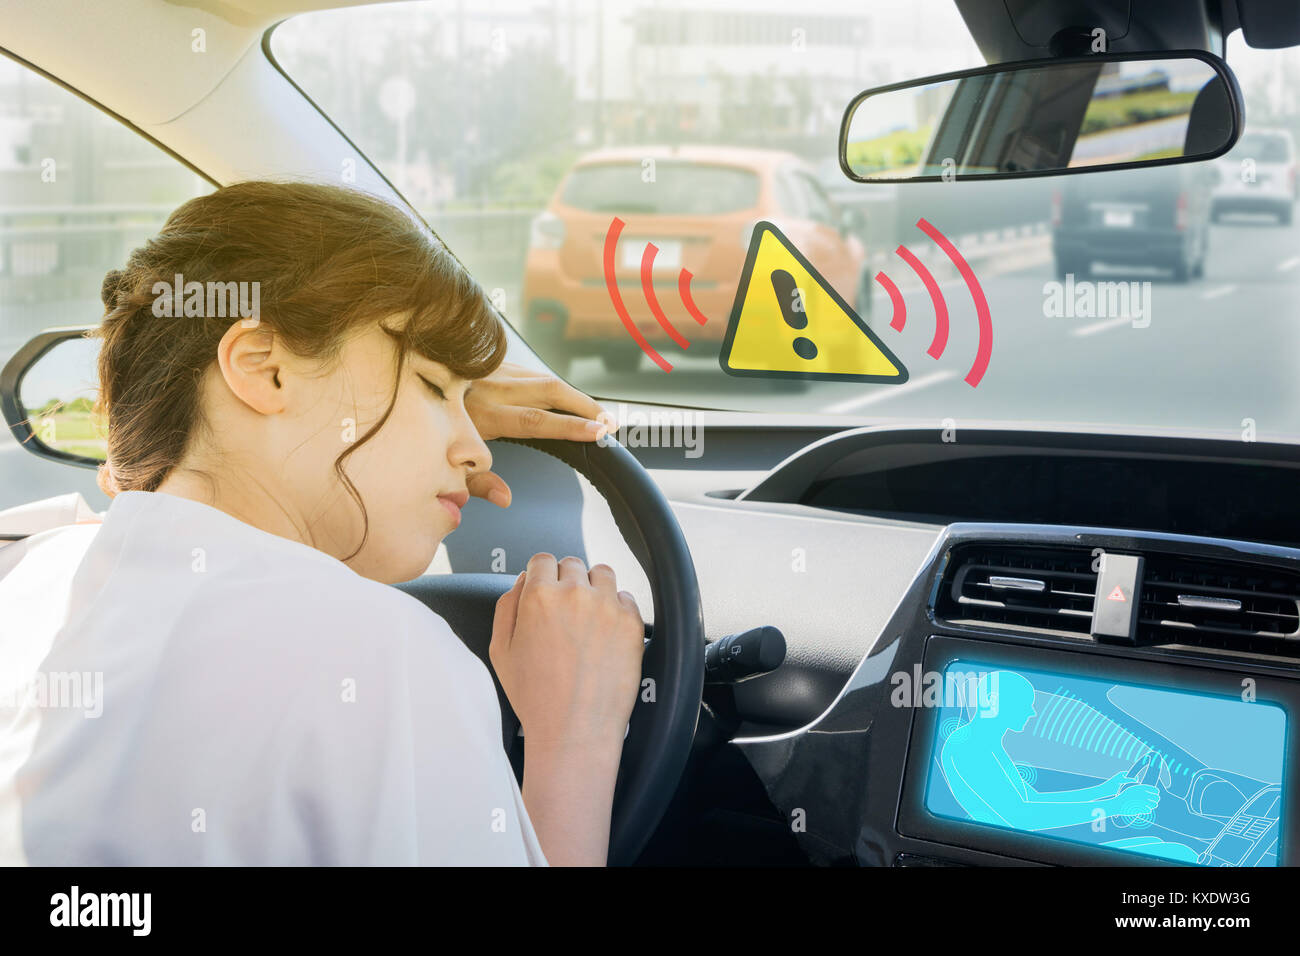 doze prevention apparatus. driver assistance system. car interior and driver. Stock Photo